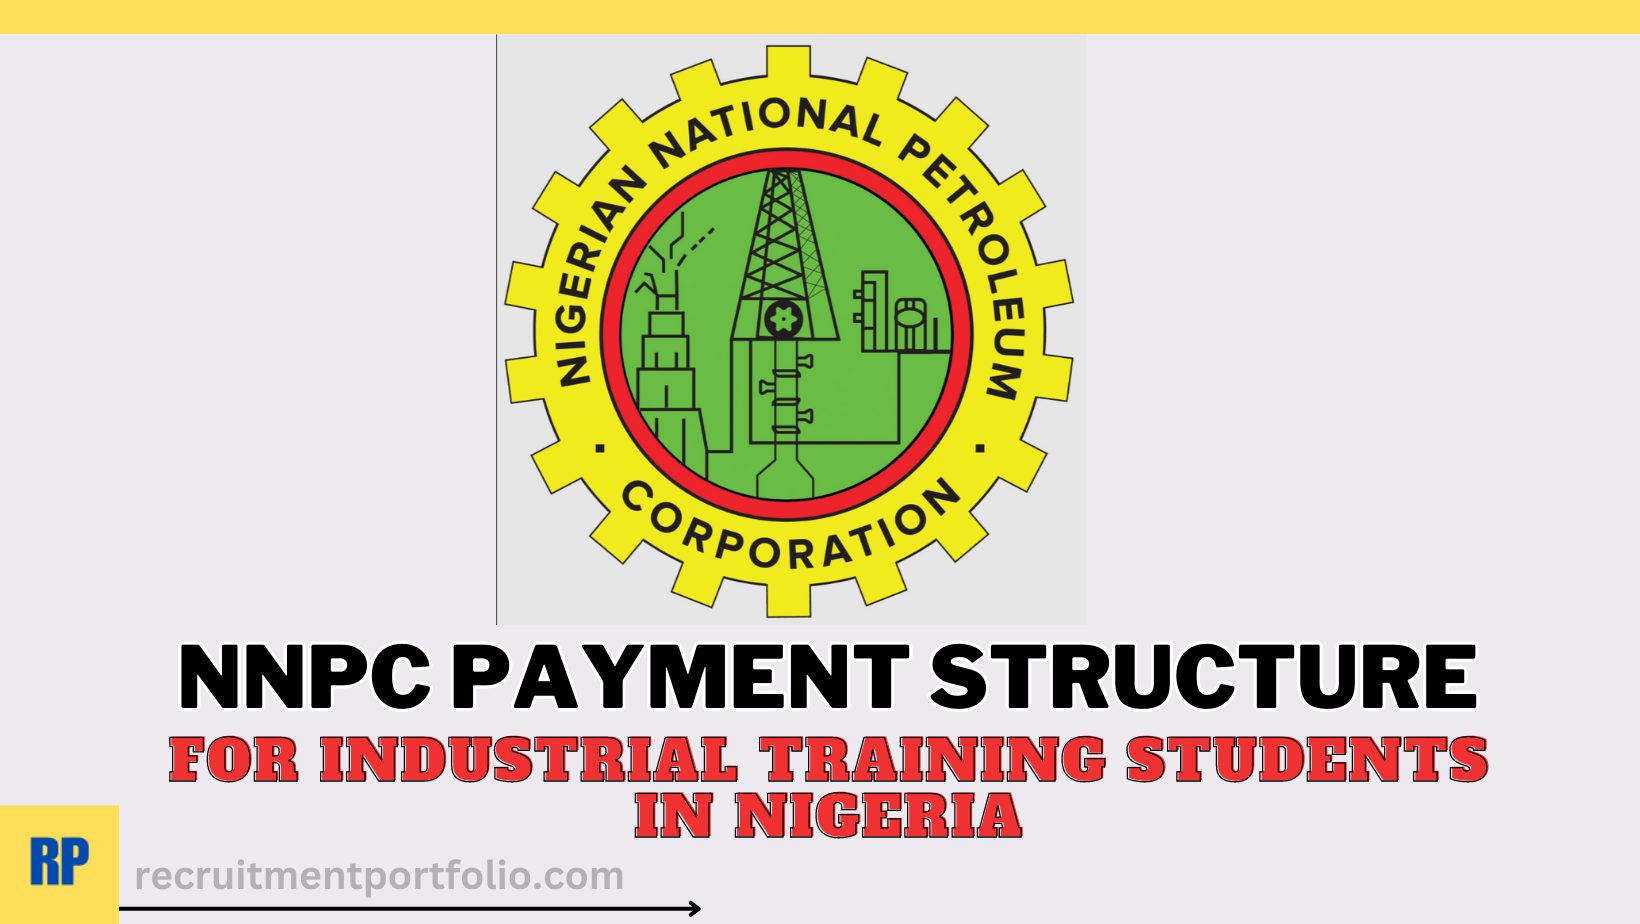 NNPC Payment Structure for Industrial Training Students in Nigeria